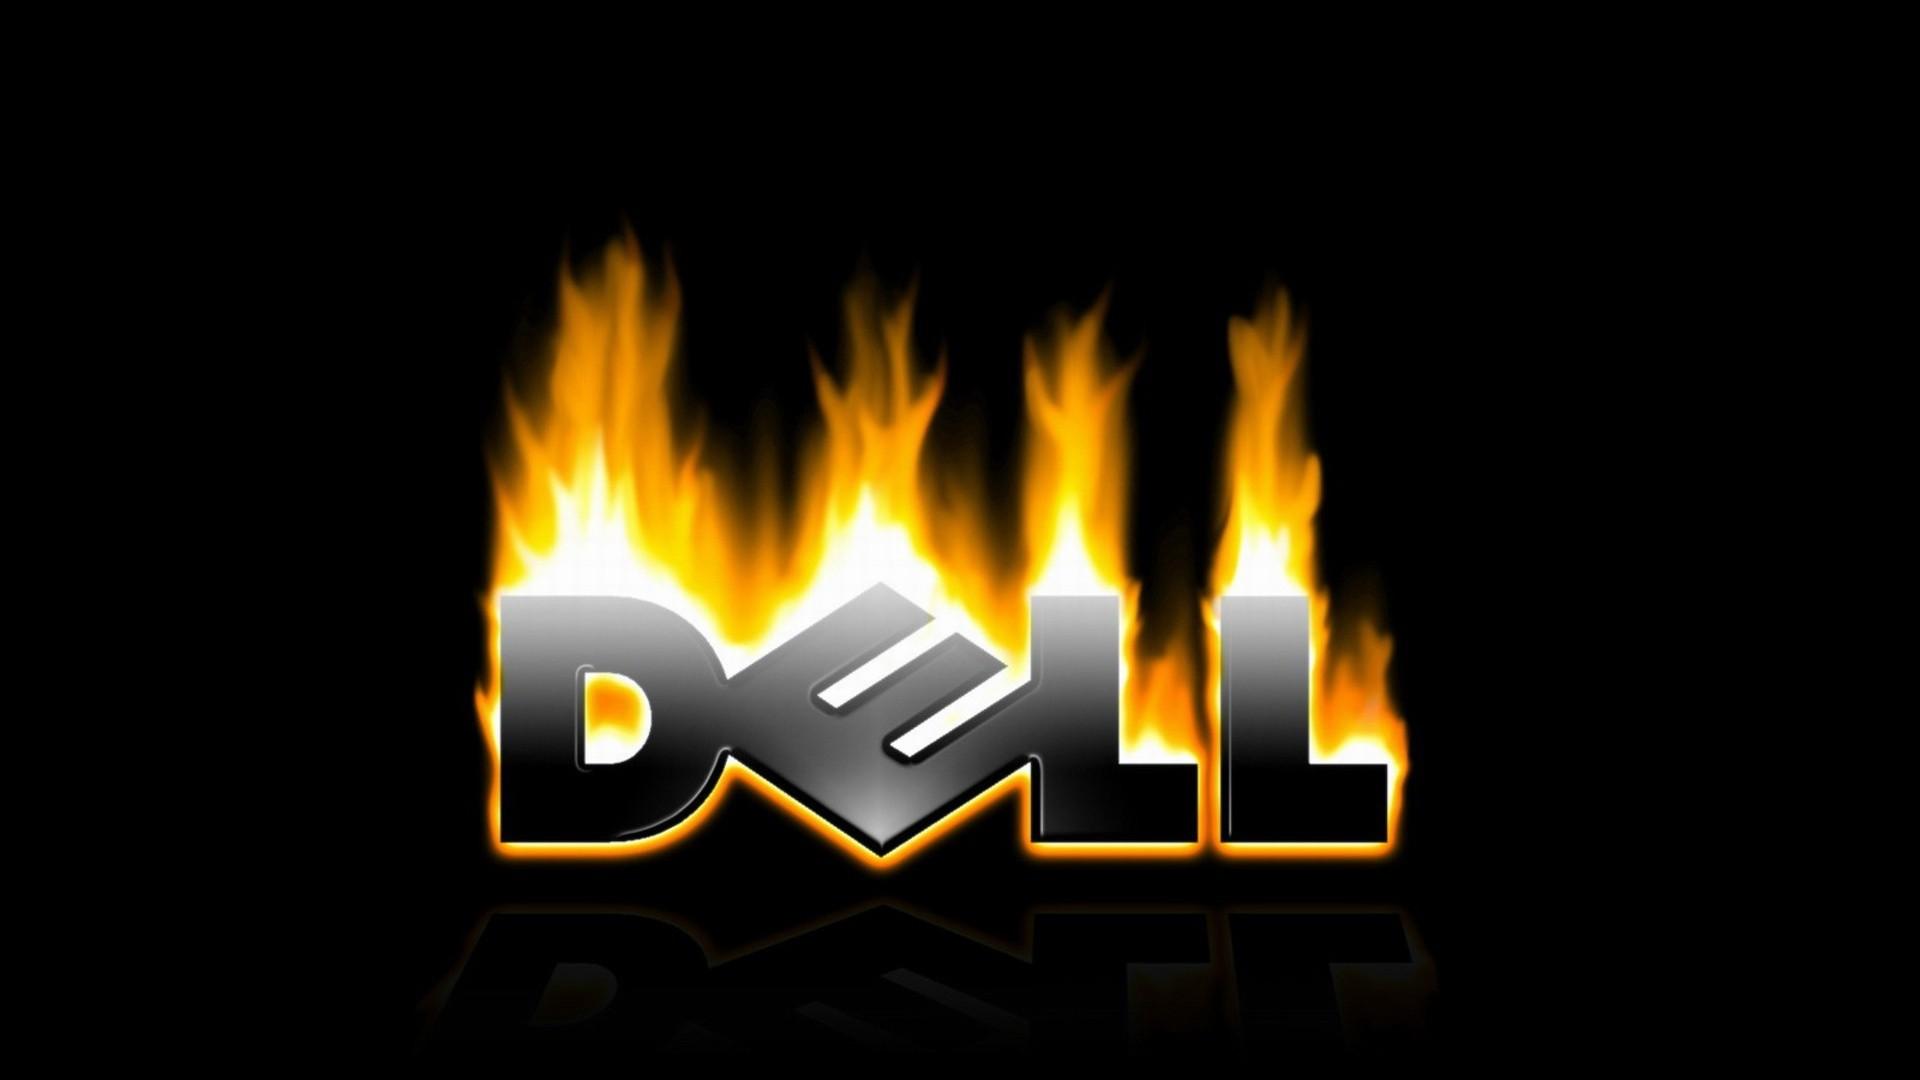 Dell Puters Logos Best Widescreen Background Awesome HD